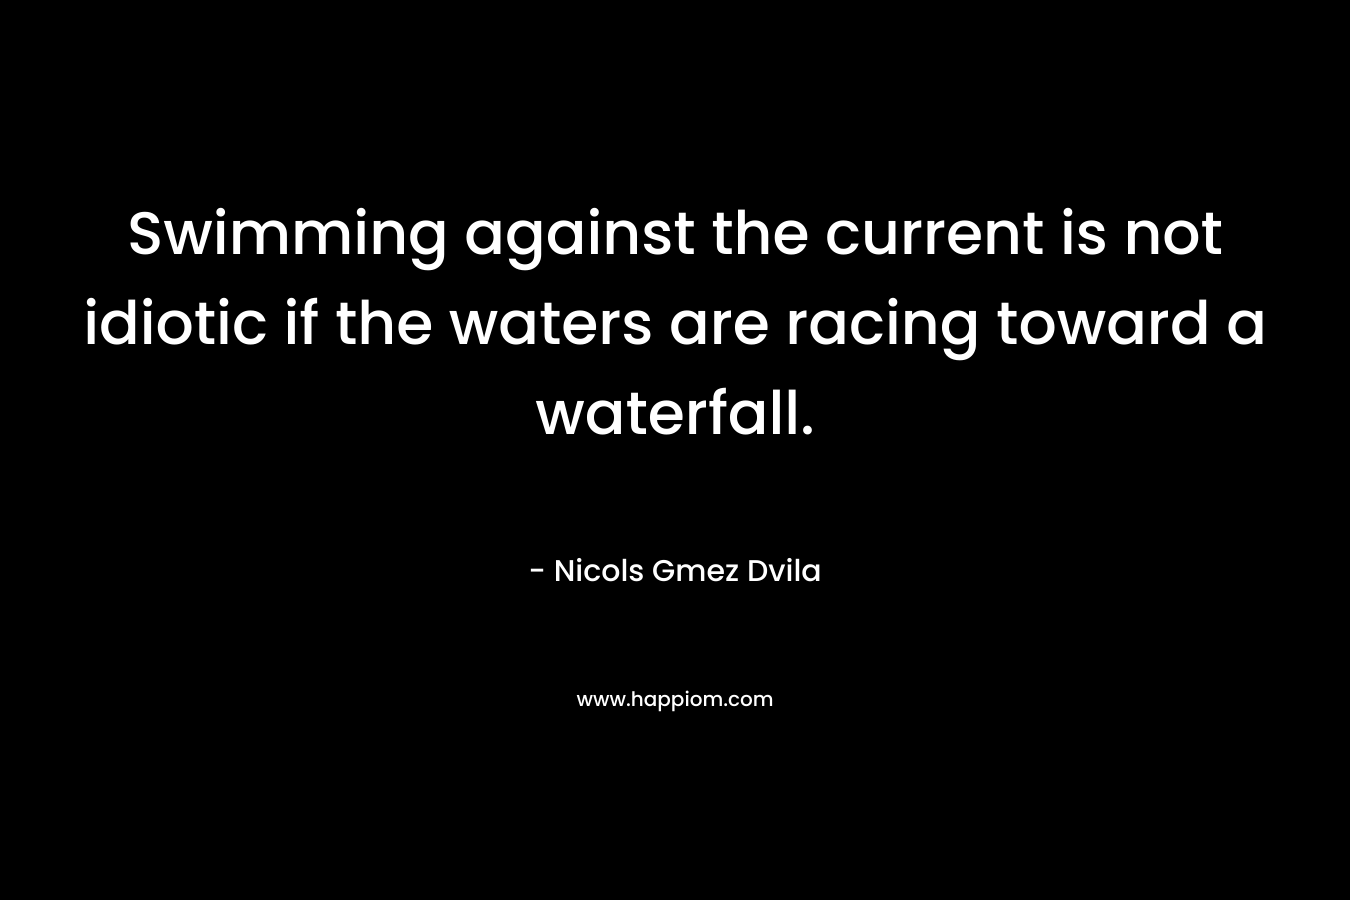 Swimming against the current is not idiotic if the waters are racing toward a waterfall.